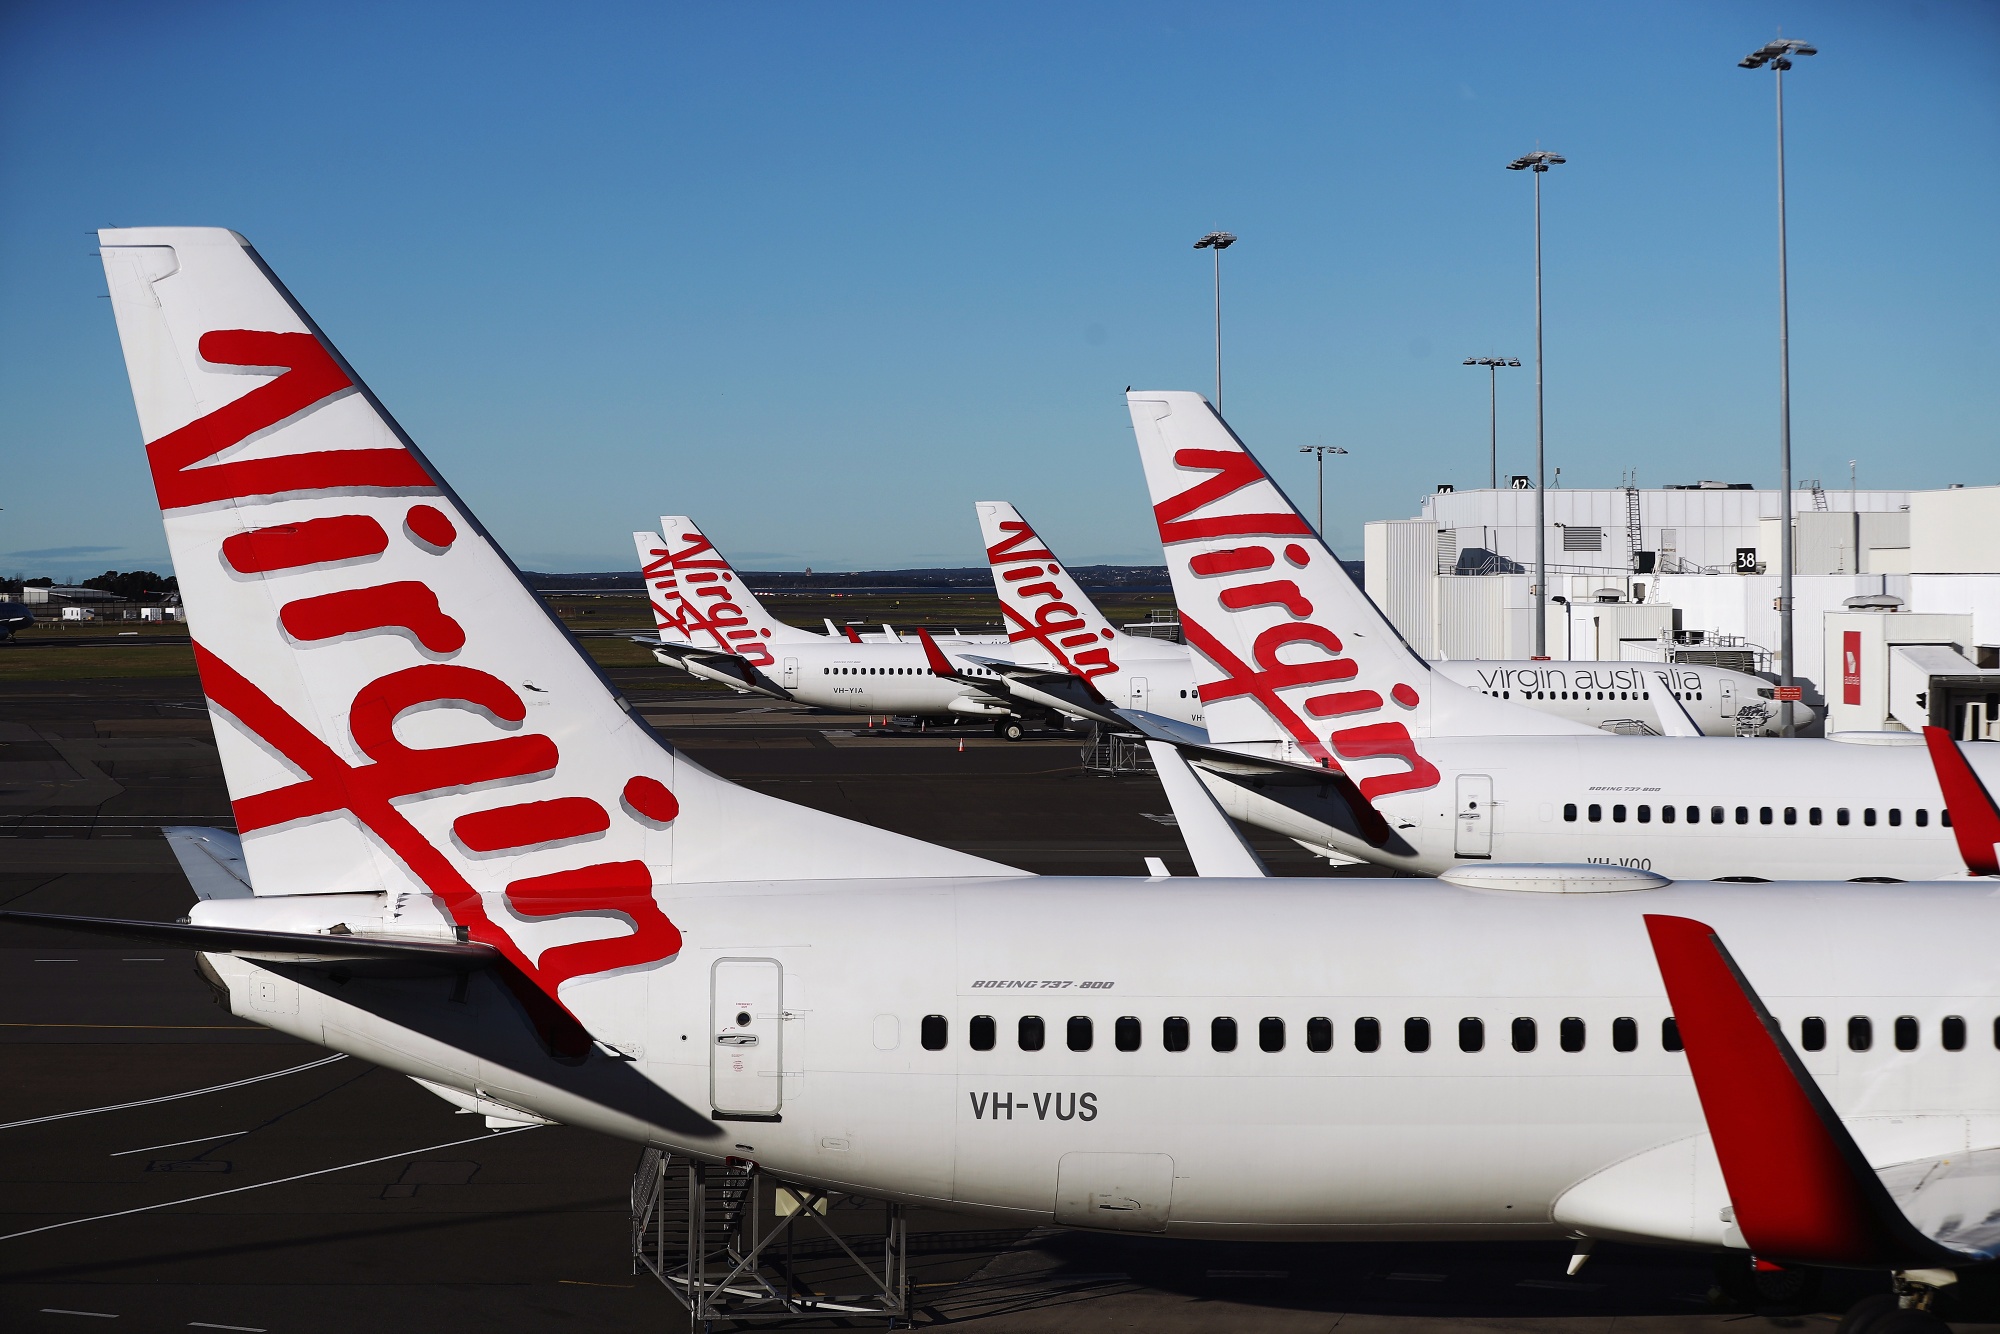 Aircraft operated by Virgin Australia Holdings Ltd. stand at Sydney Airport in Sydney, Australia, on Aug. 17.